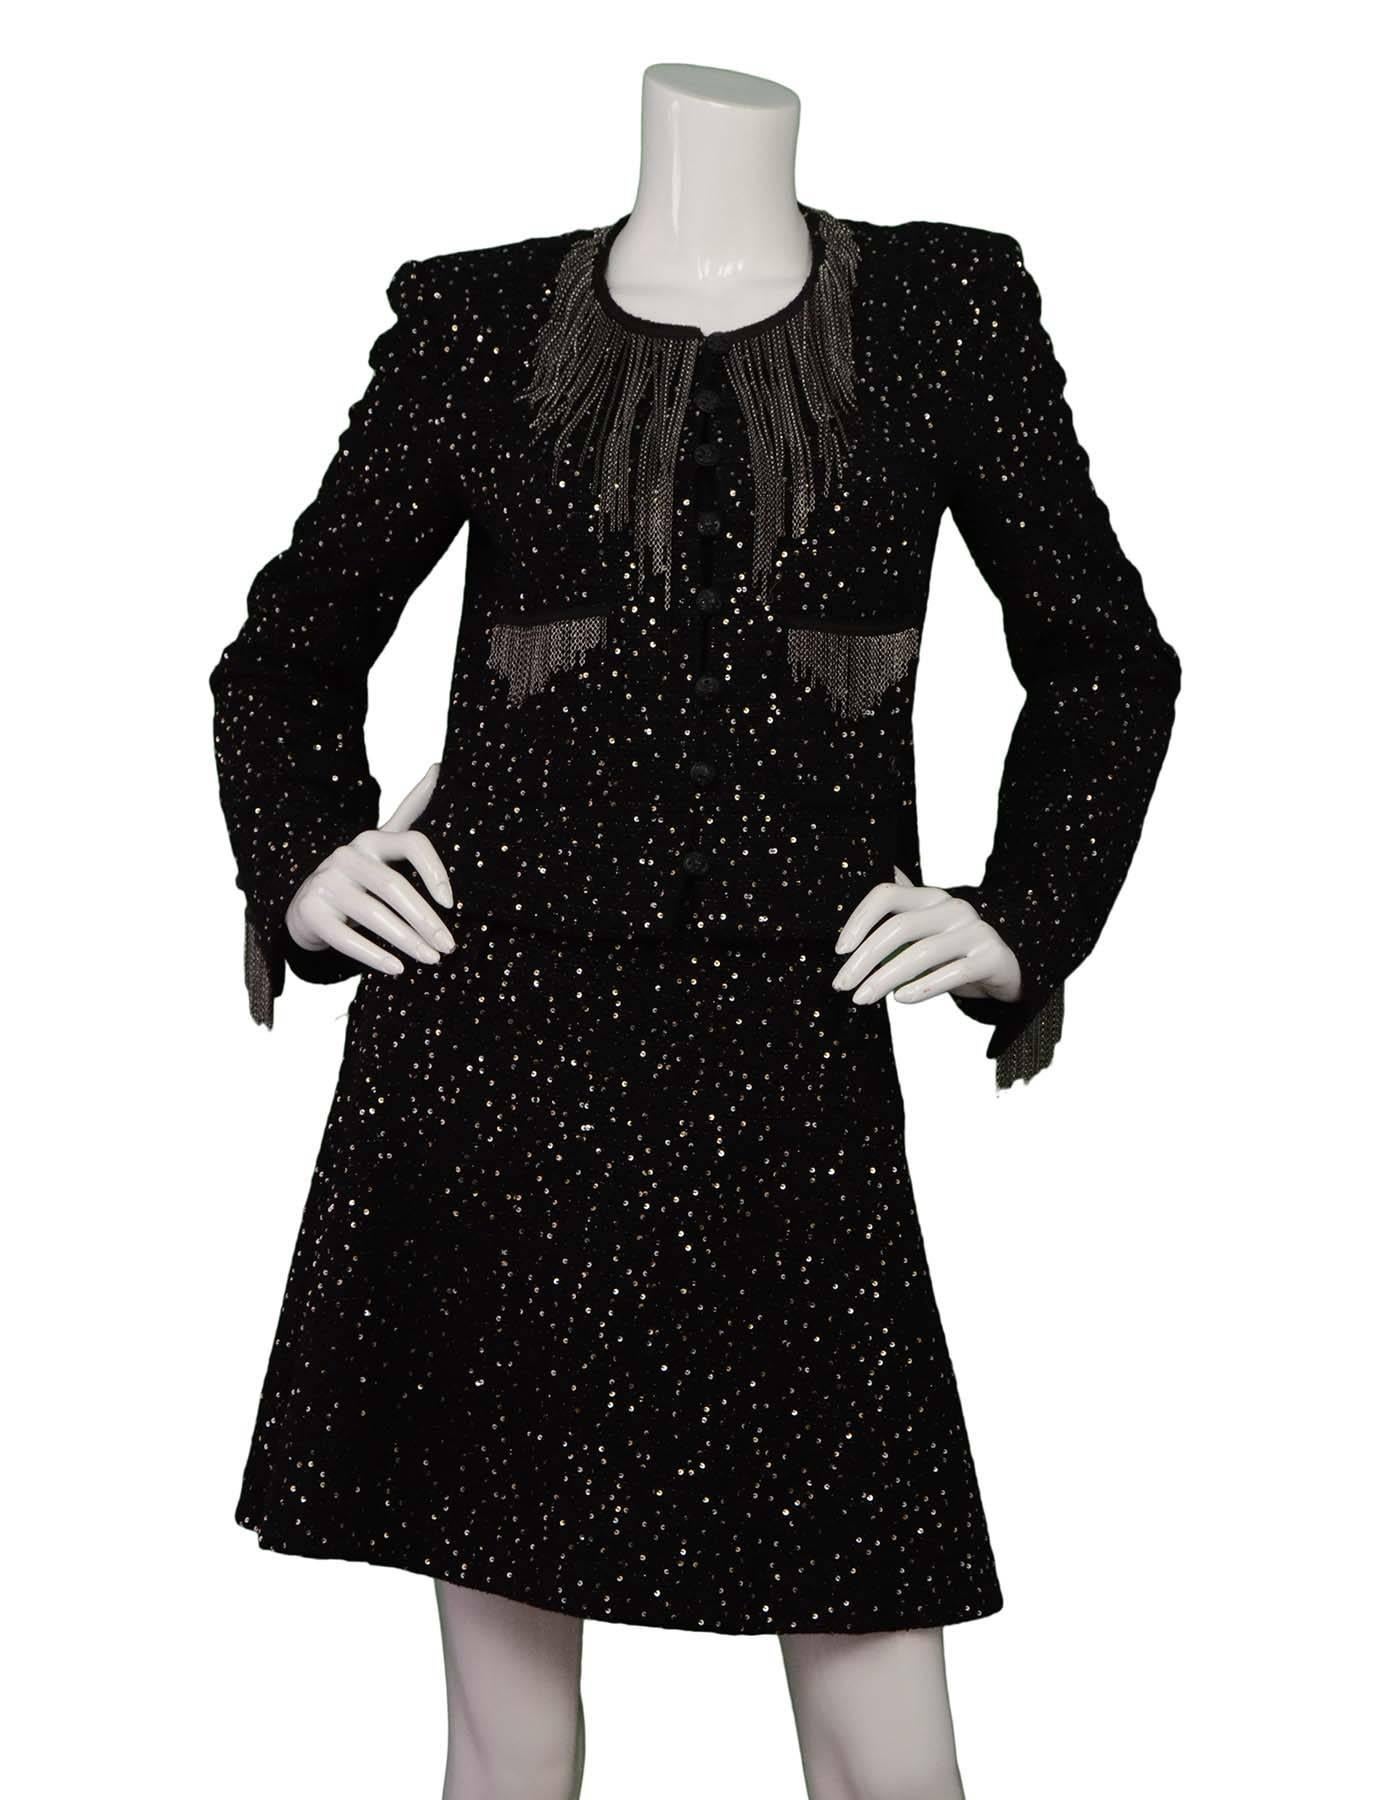 Chanel Black Tweed Sequin & Chain Fringe Skirt Suit
Made In: France
Year of Production: 2002
Color: Black
Composition: 66% wool, 14% cotton, 13% nylon, 5% vinyon, 1% polyester, 1% rayon
Lining: Black, Jacket- 95% silk, 5% spandex, Skirt-